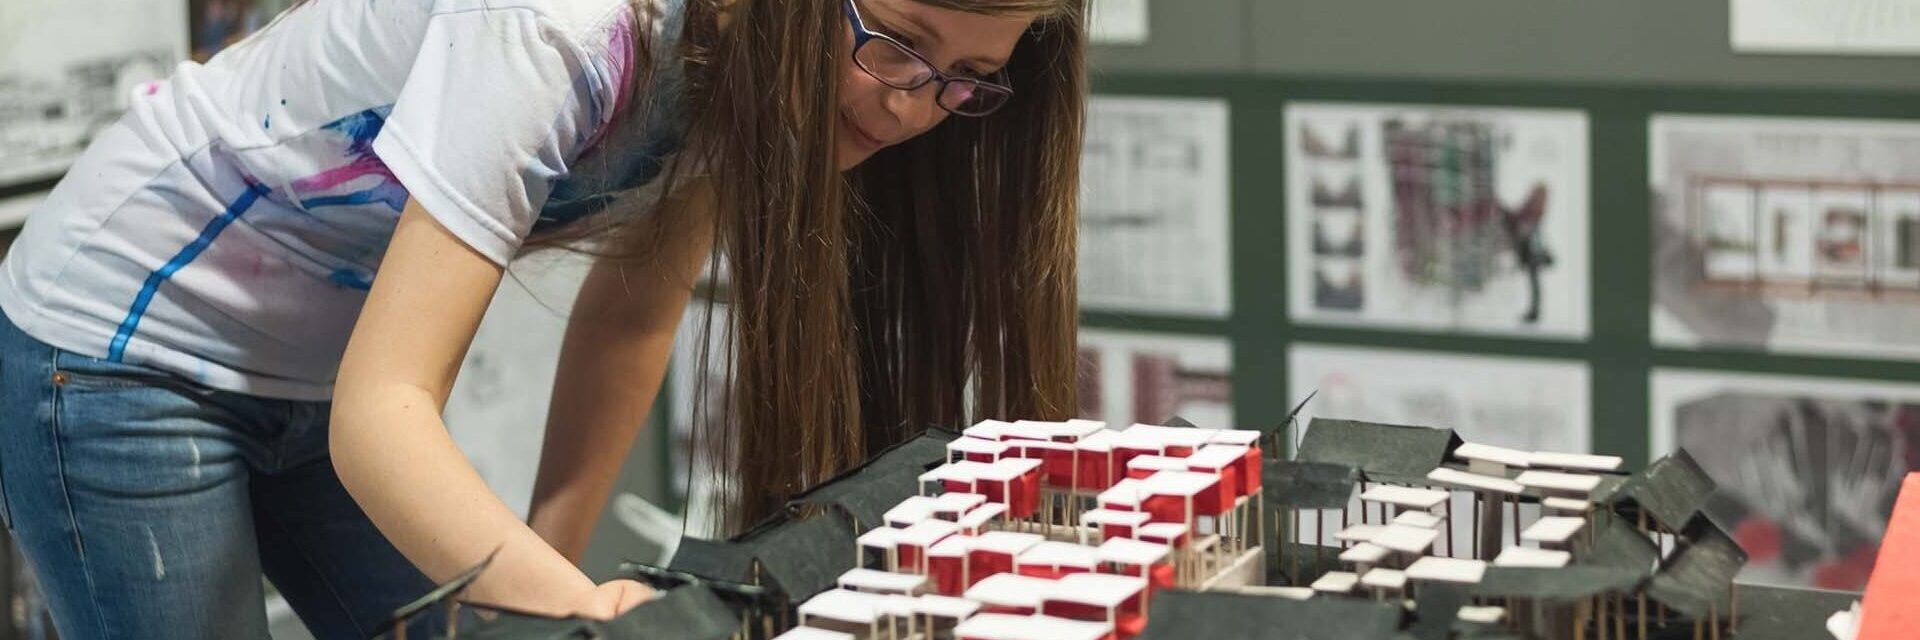 Student working on a building model